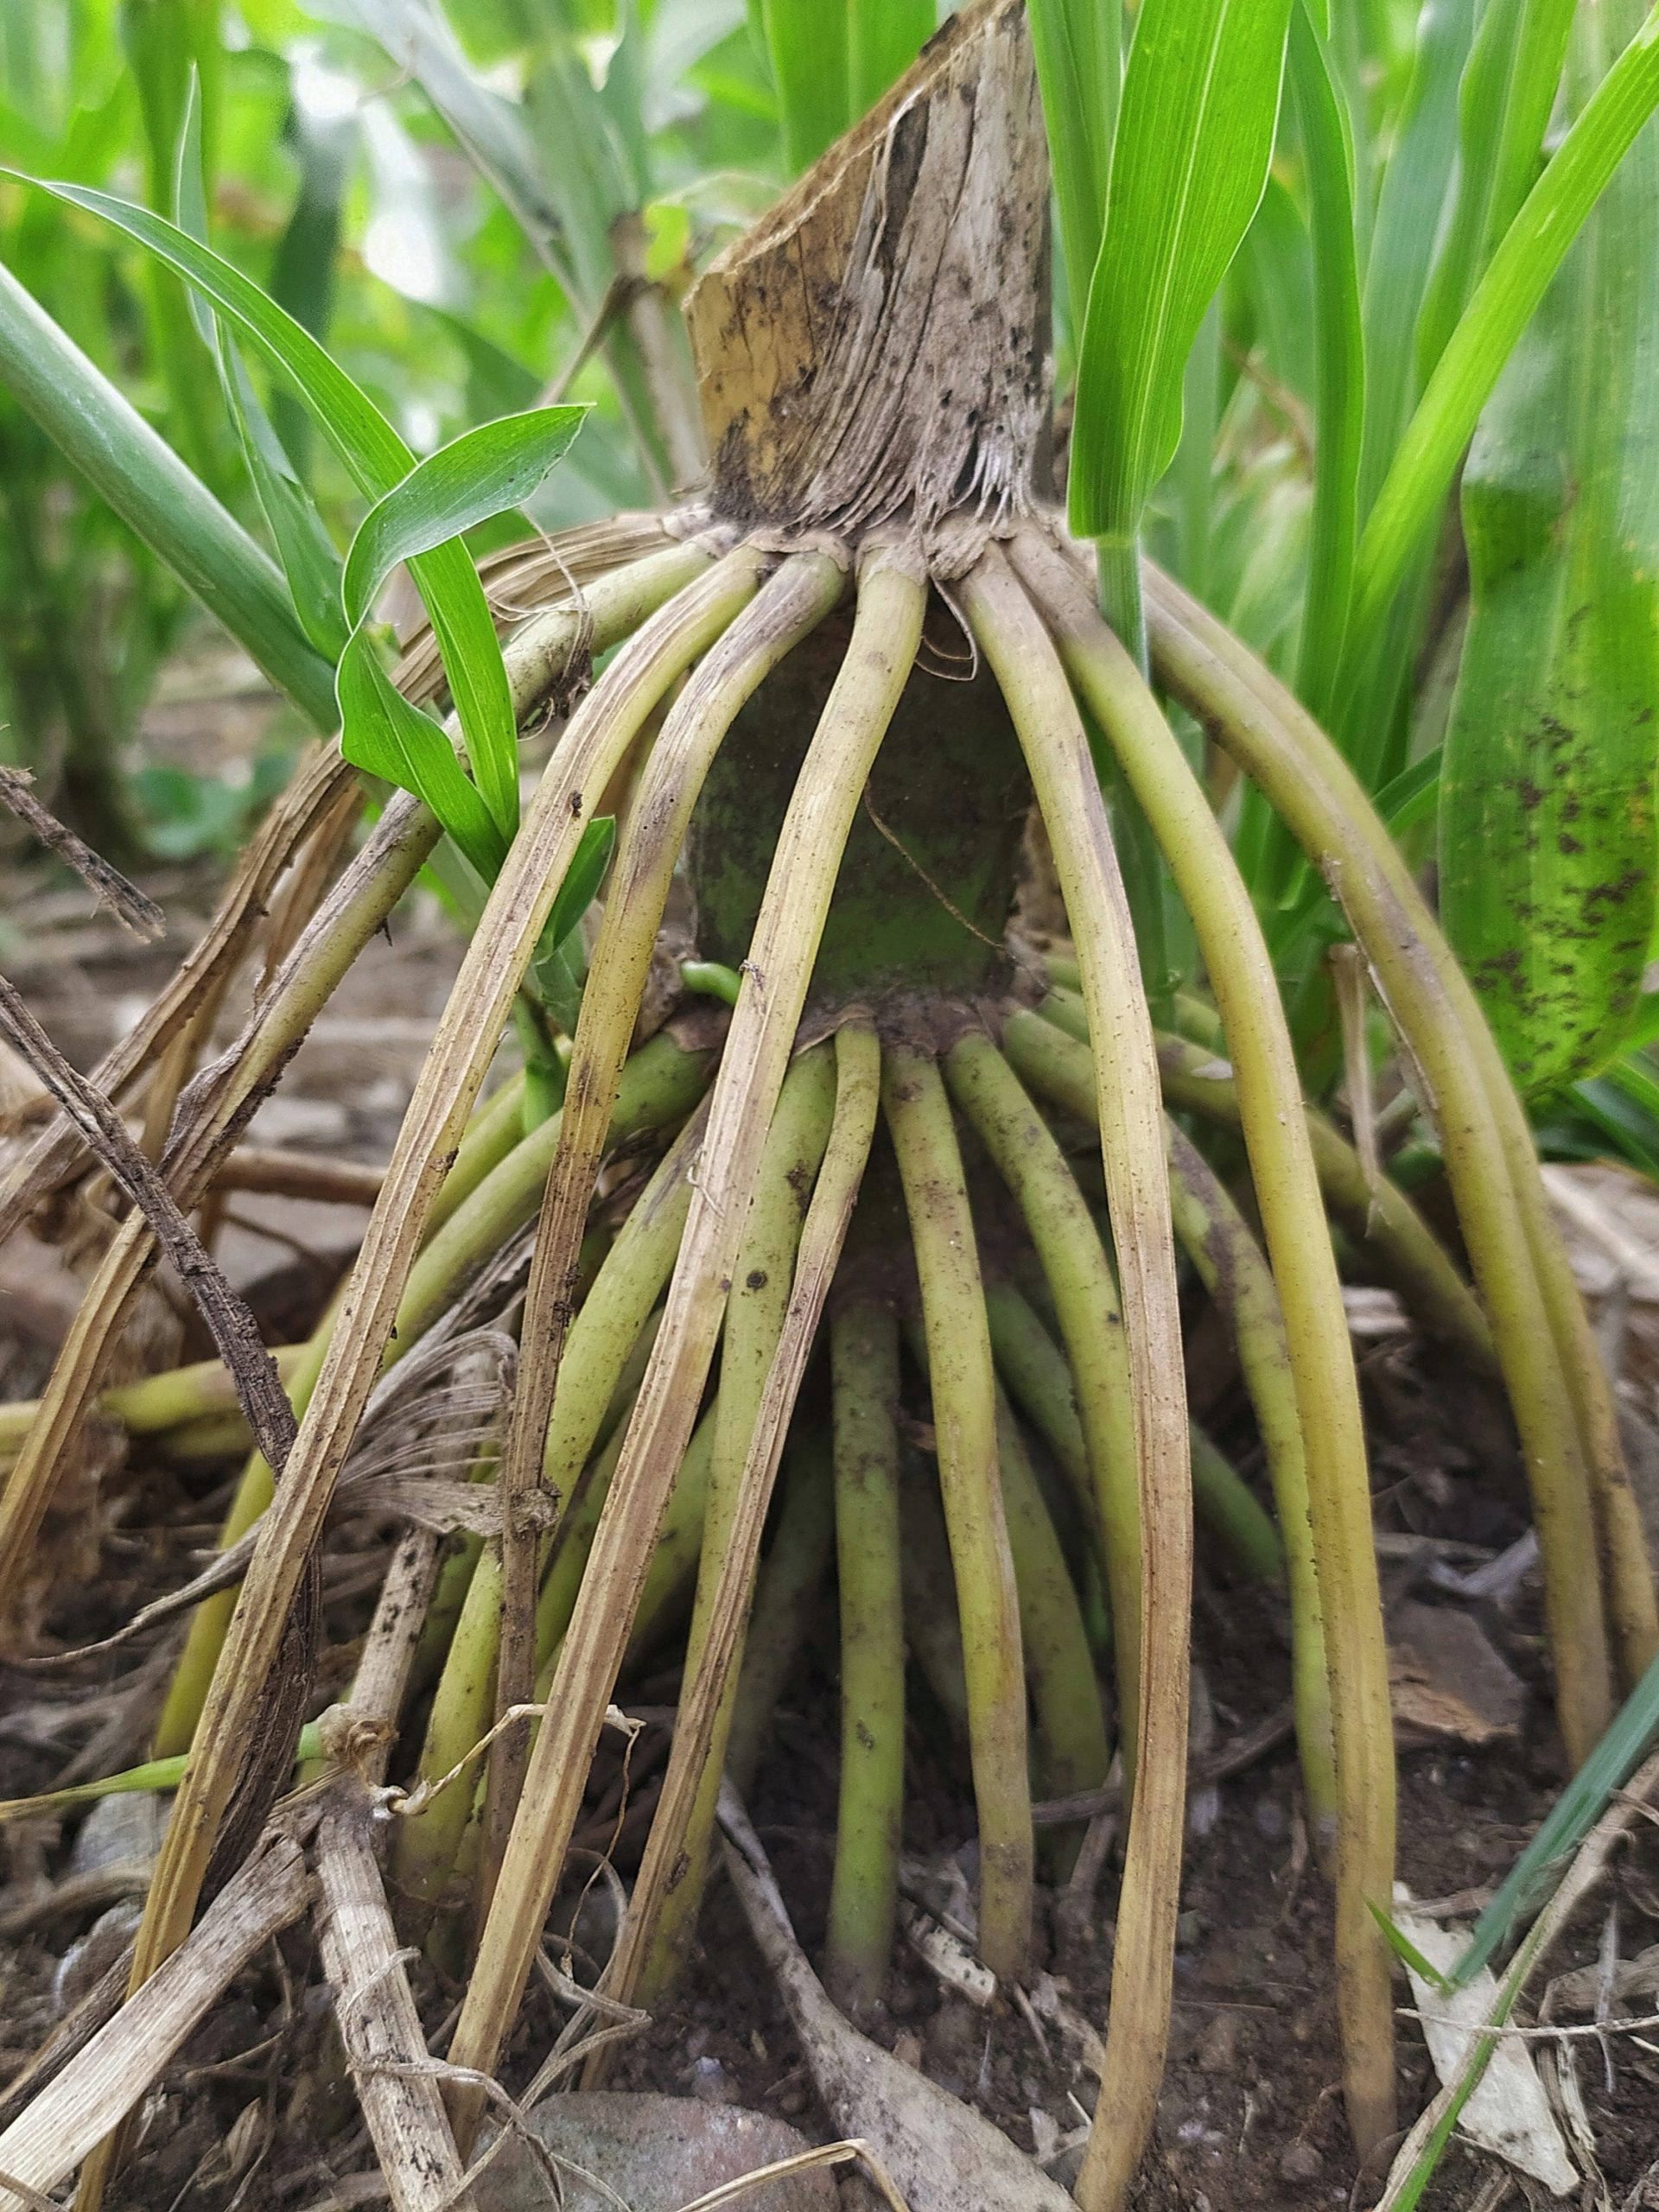 Prop roots of maize plant